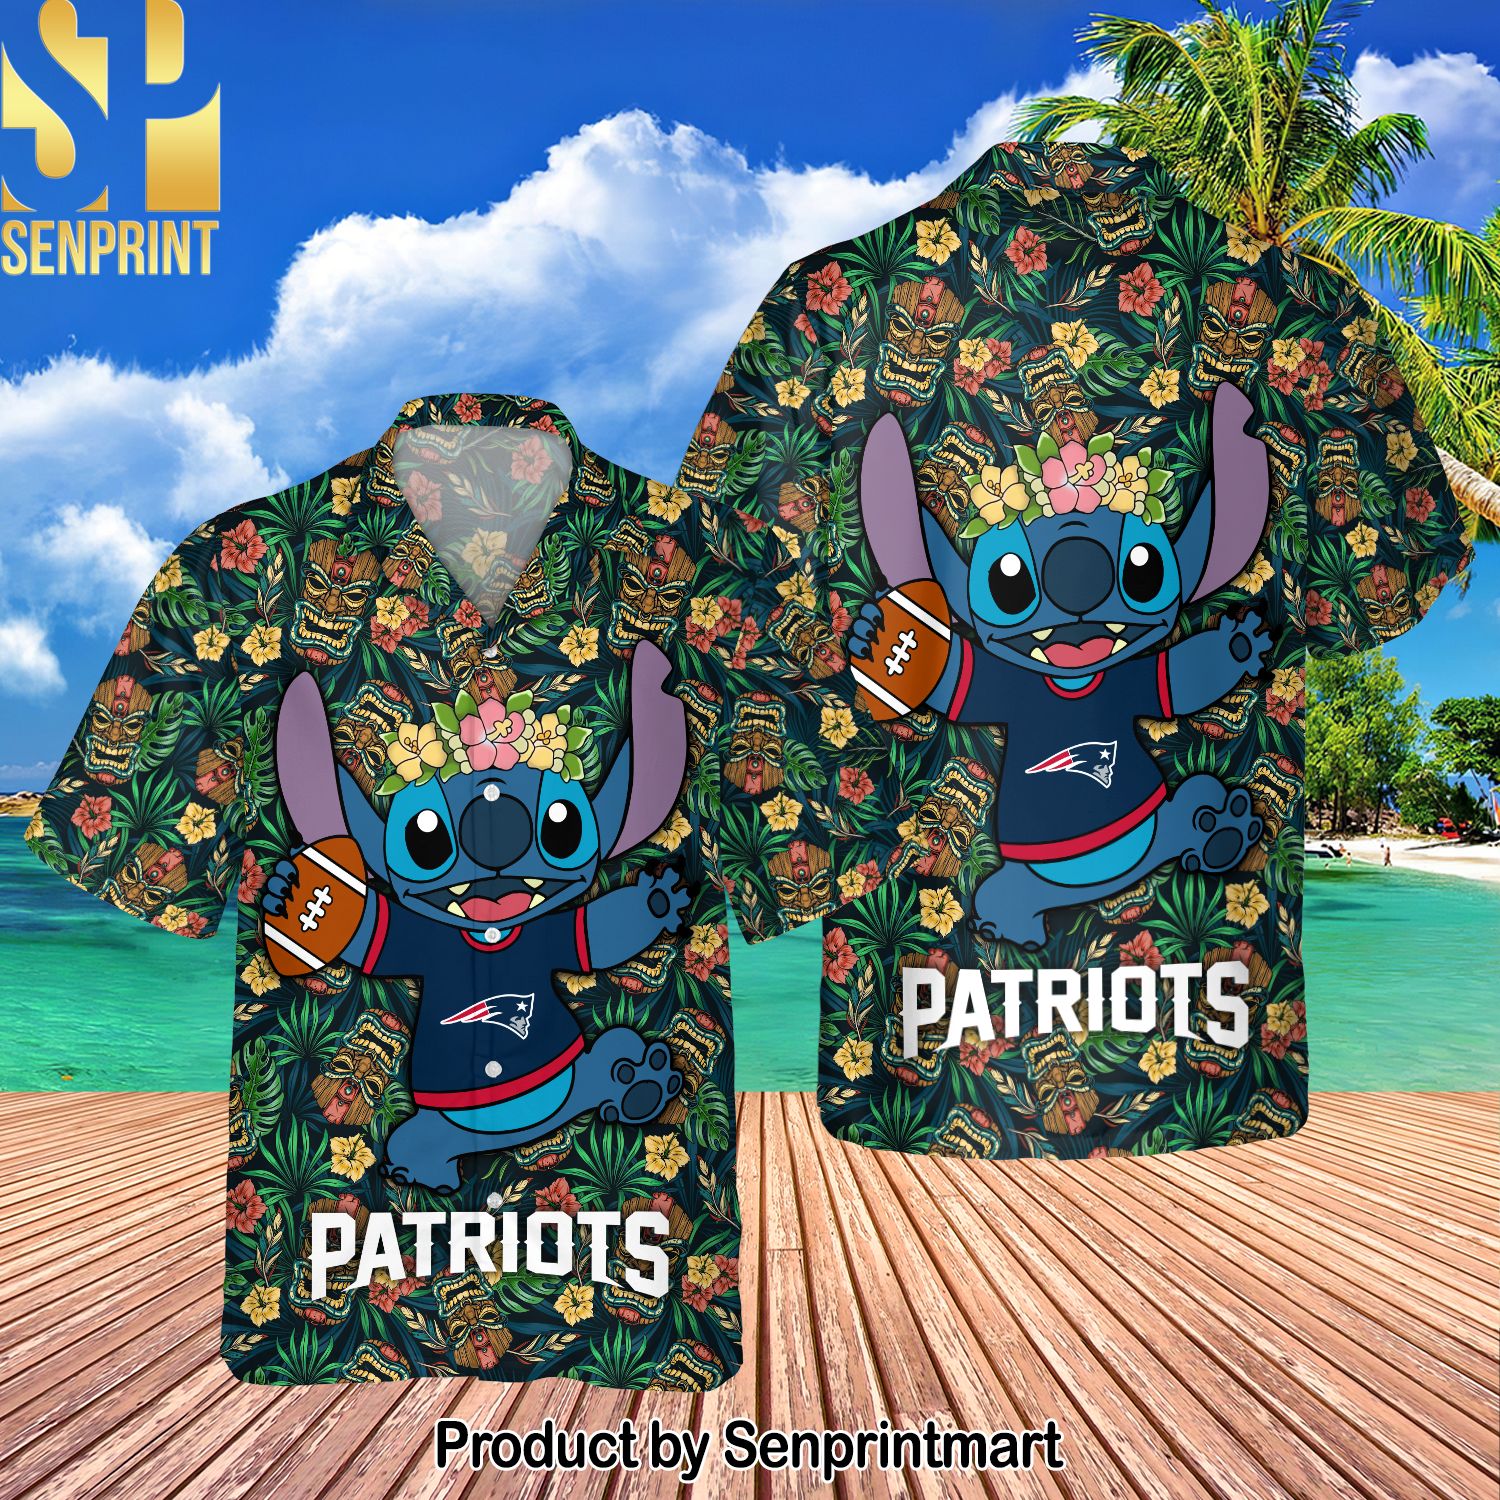 New England Patriots National Football League Stitch Graphic For Fans Full Printed Hawaiian Shirt